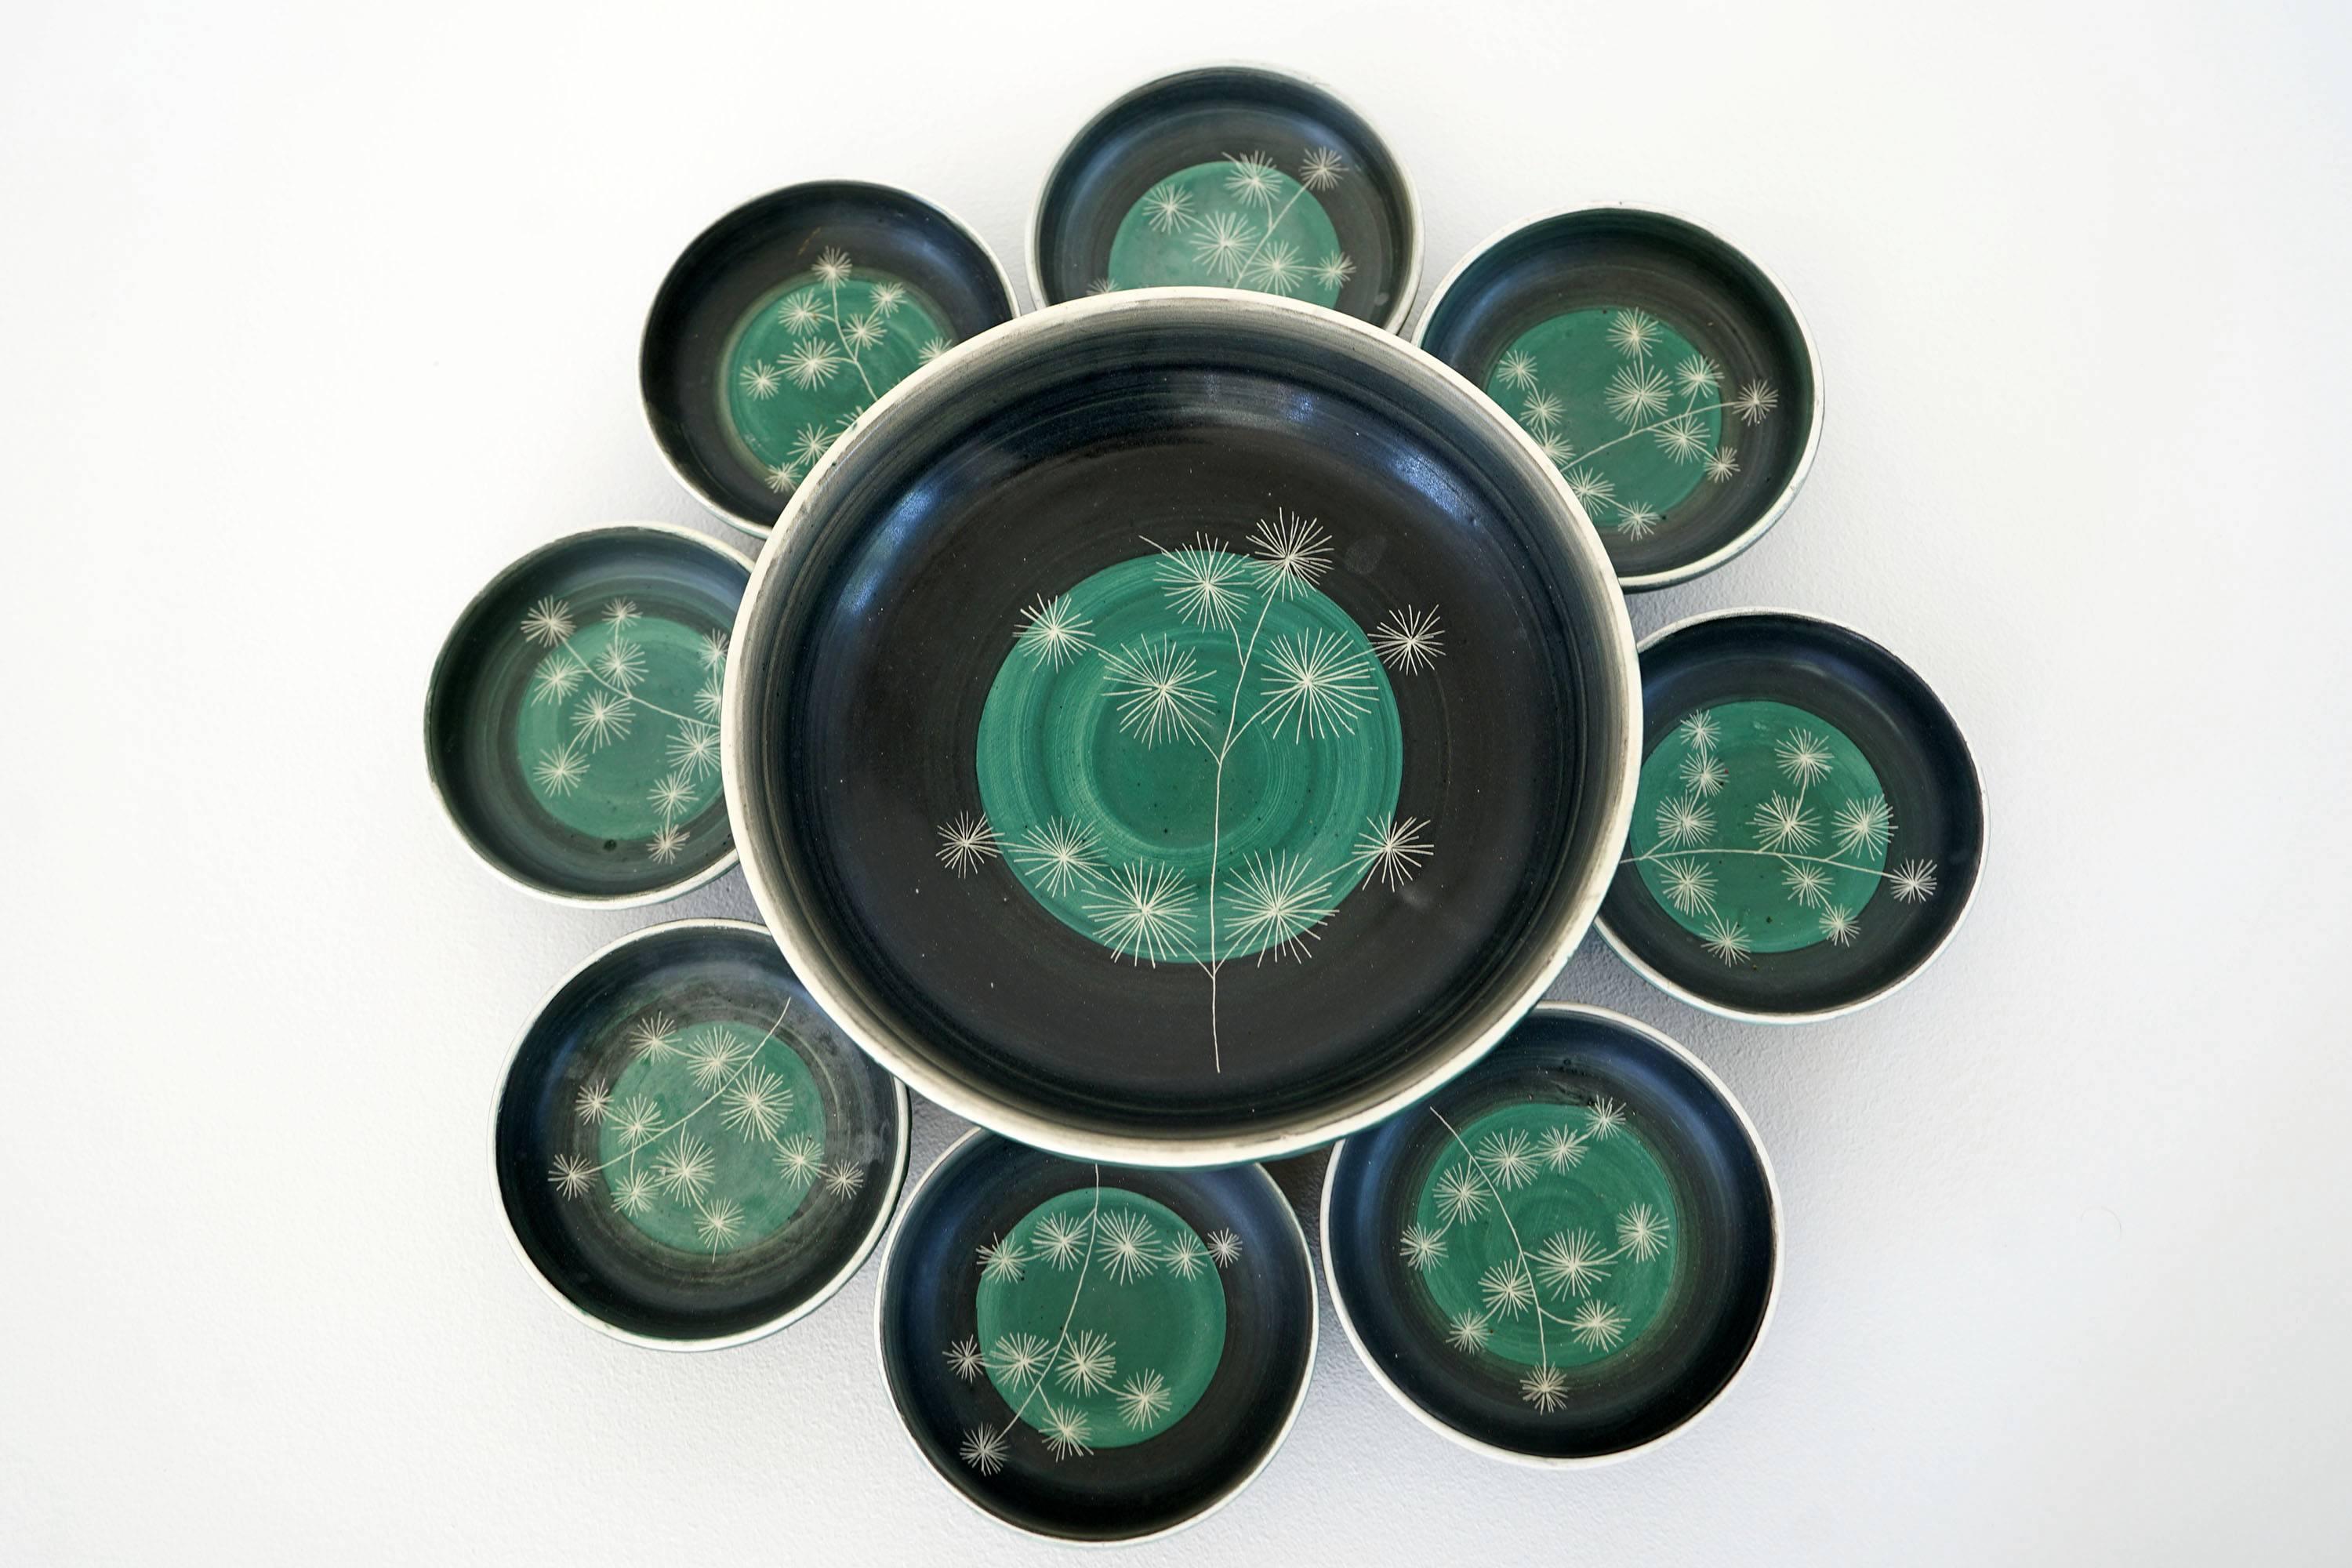 Mid-Century Modern Set of Handmade Ceramic Bowls by Tapis Vert in Vallauris, 1950s For Sale